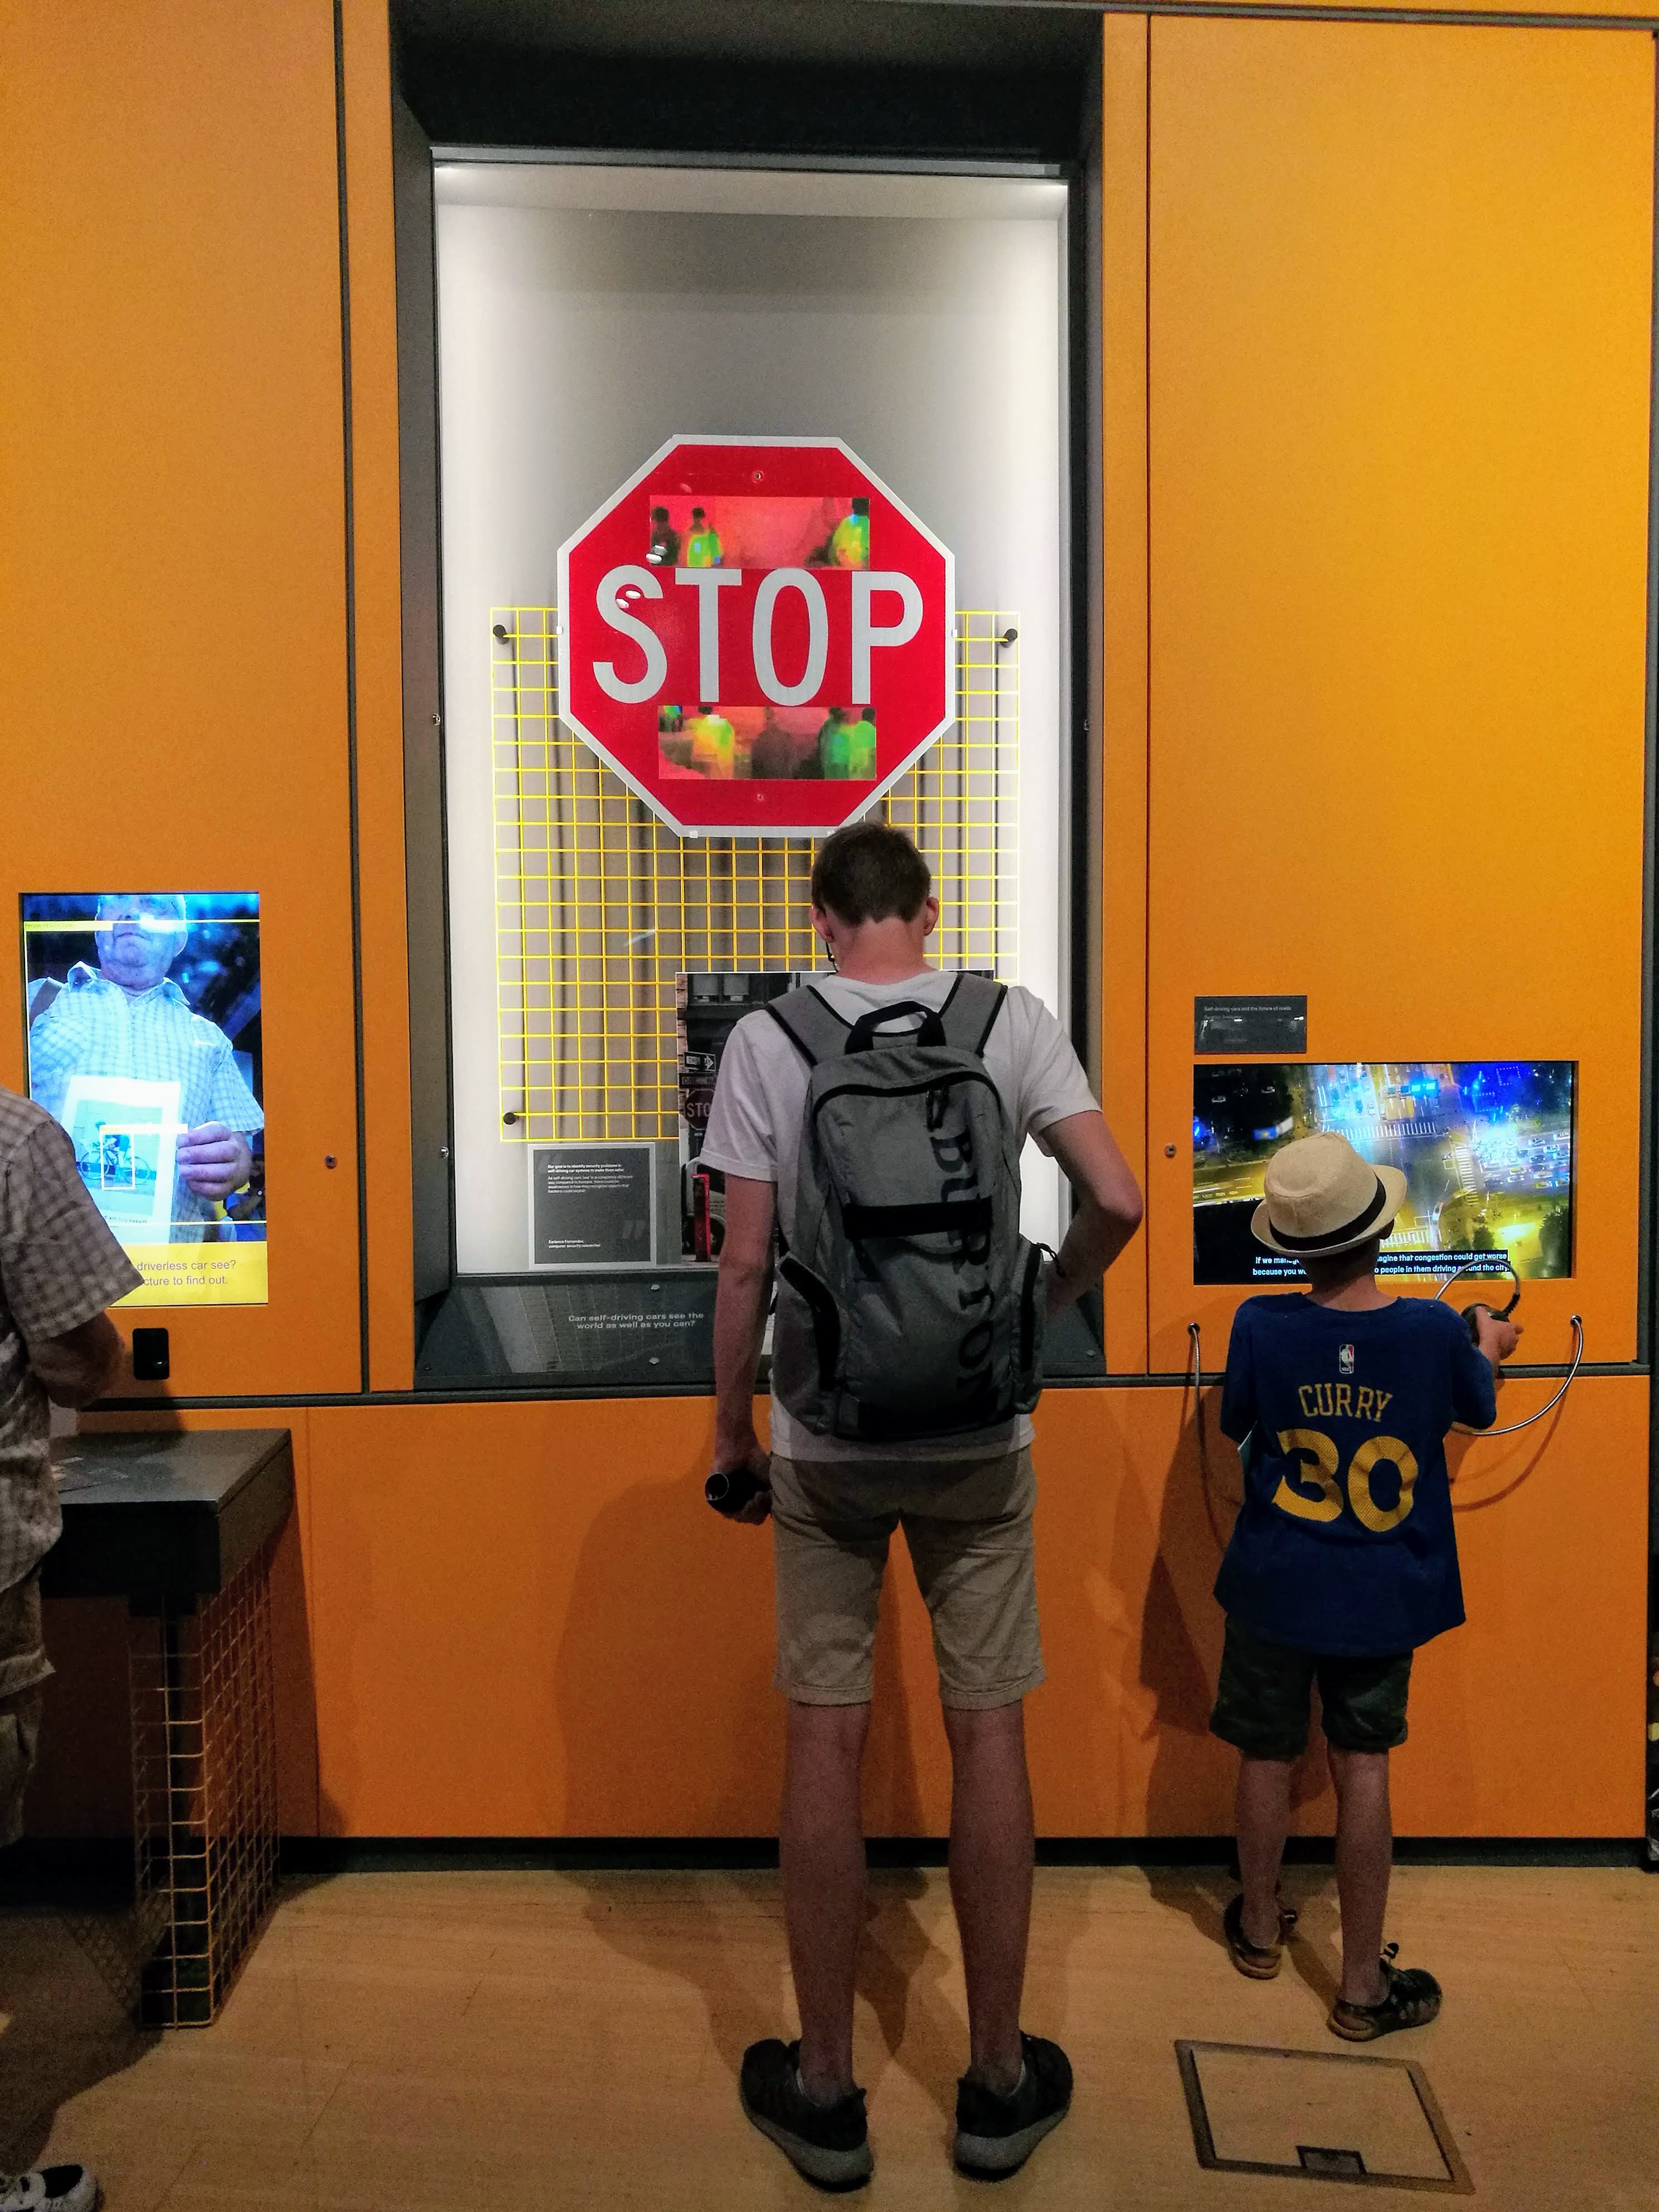 Visitors examine a display that shows a stop sign with stickers at the top and bottom of the sign.